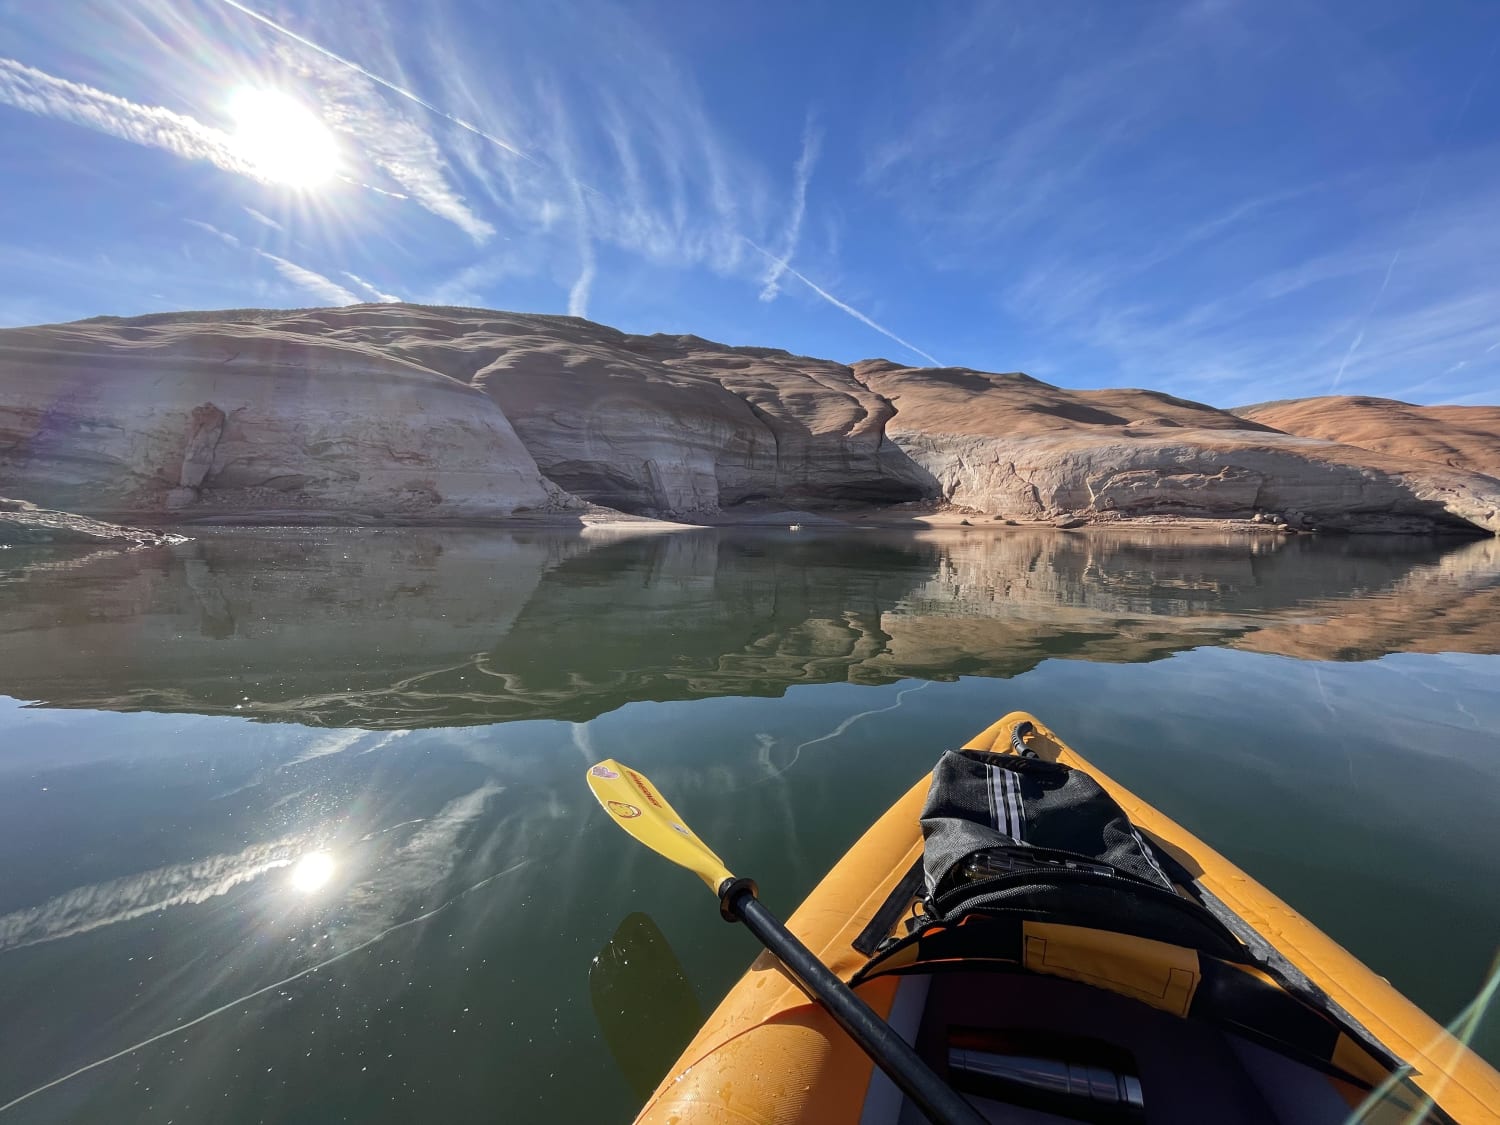 Lake Powell, UT in January. We had the place to ourselves.